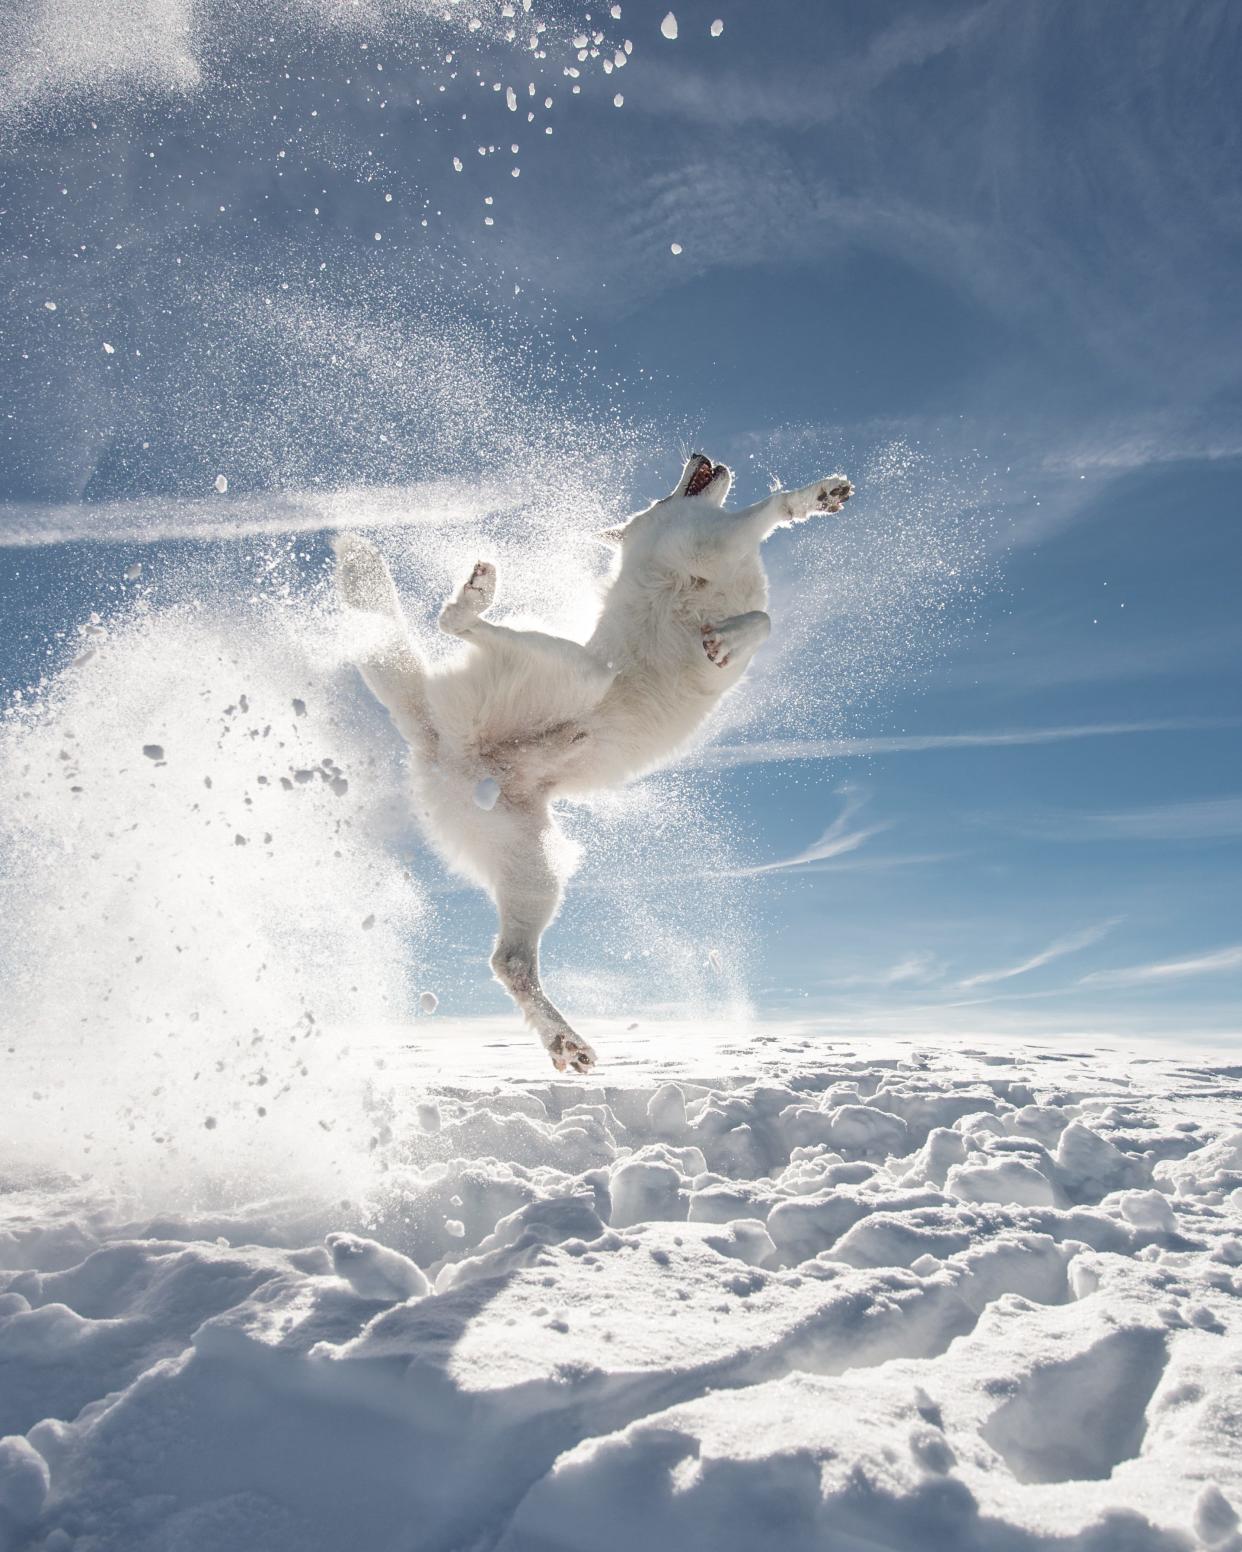 A dog jumps up to catch a snowball